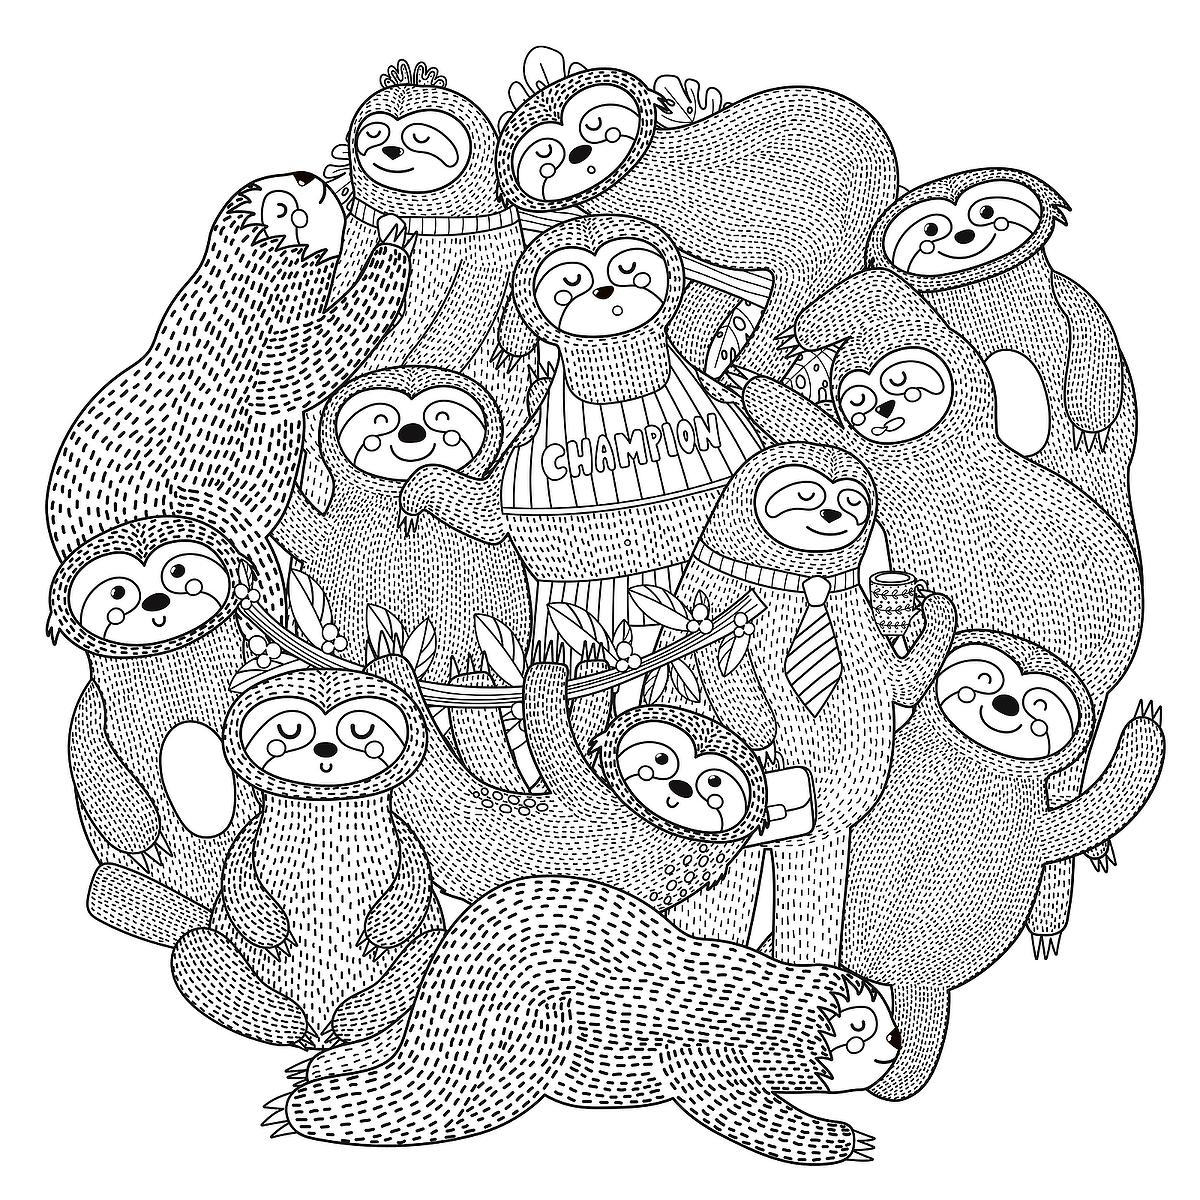 Sloth coloring pages free printable coloring pages of sloths to help you slow down relax like a sloth printables mom